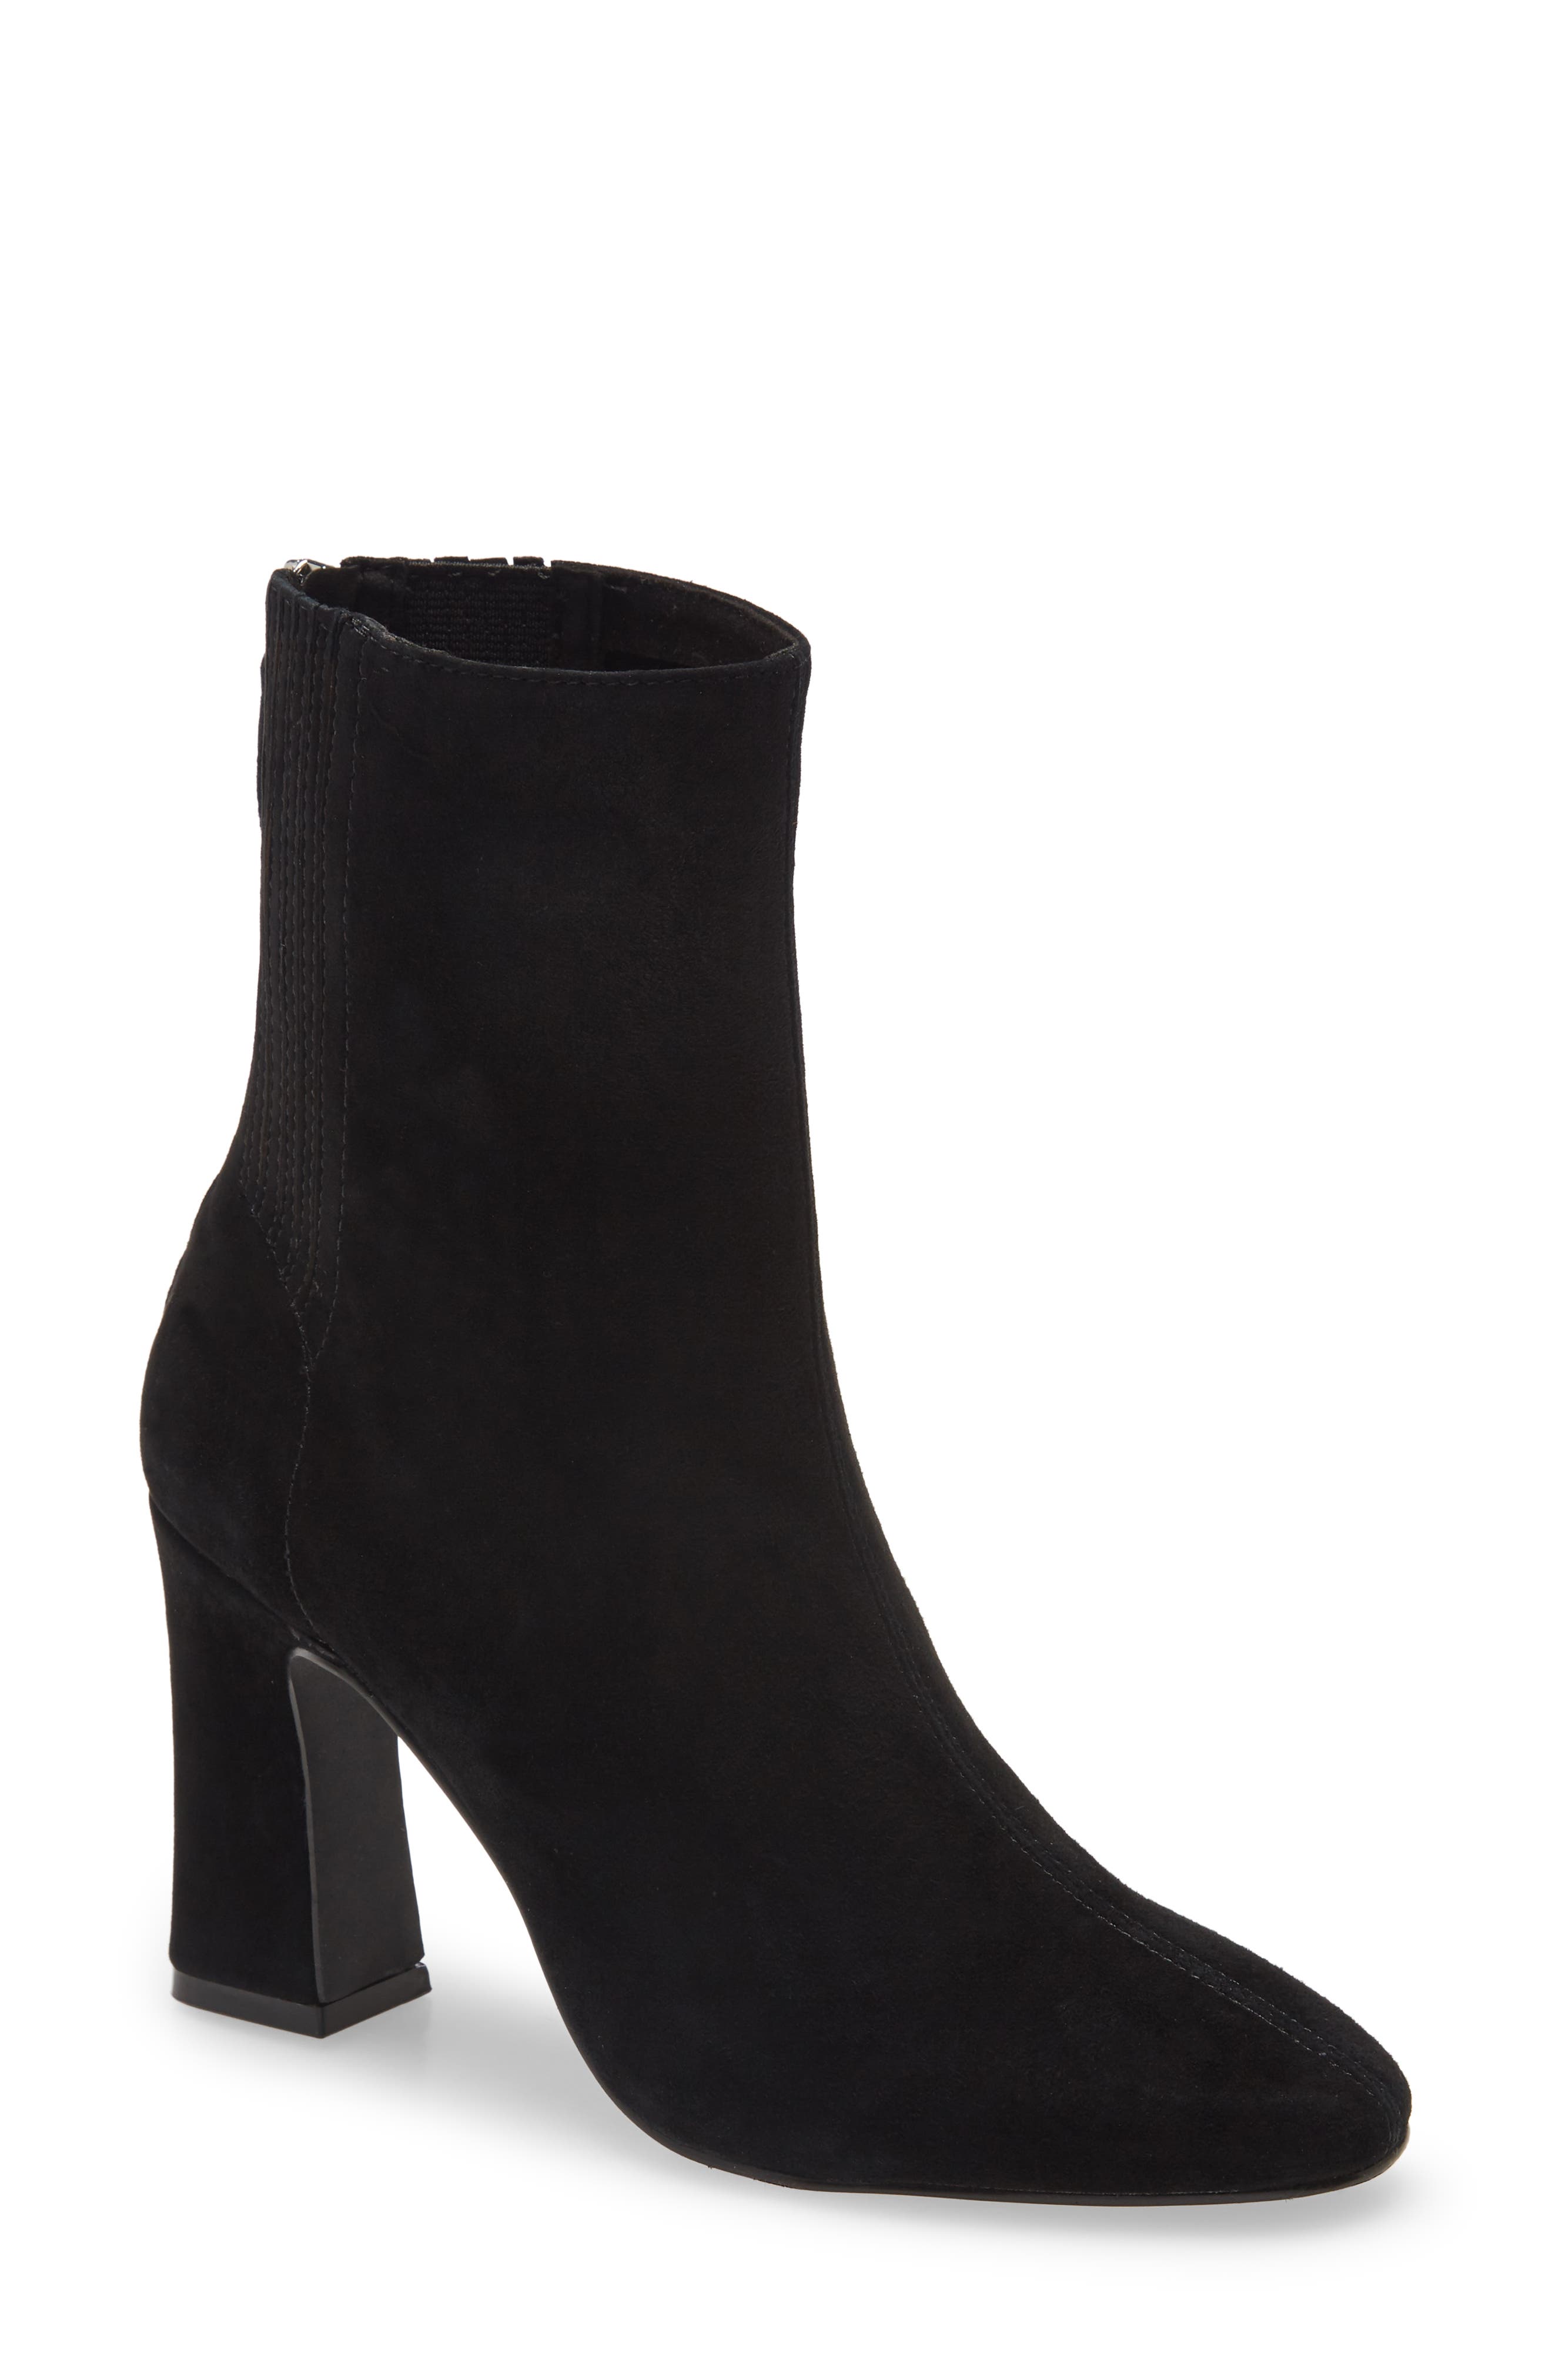 black ankle booties round toe